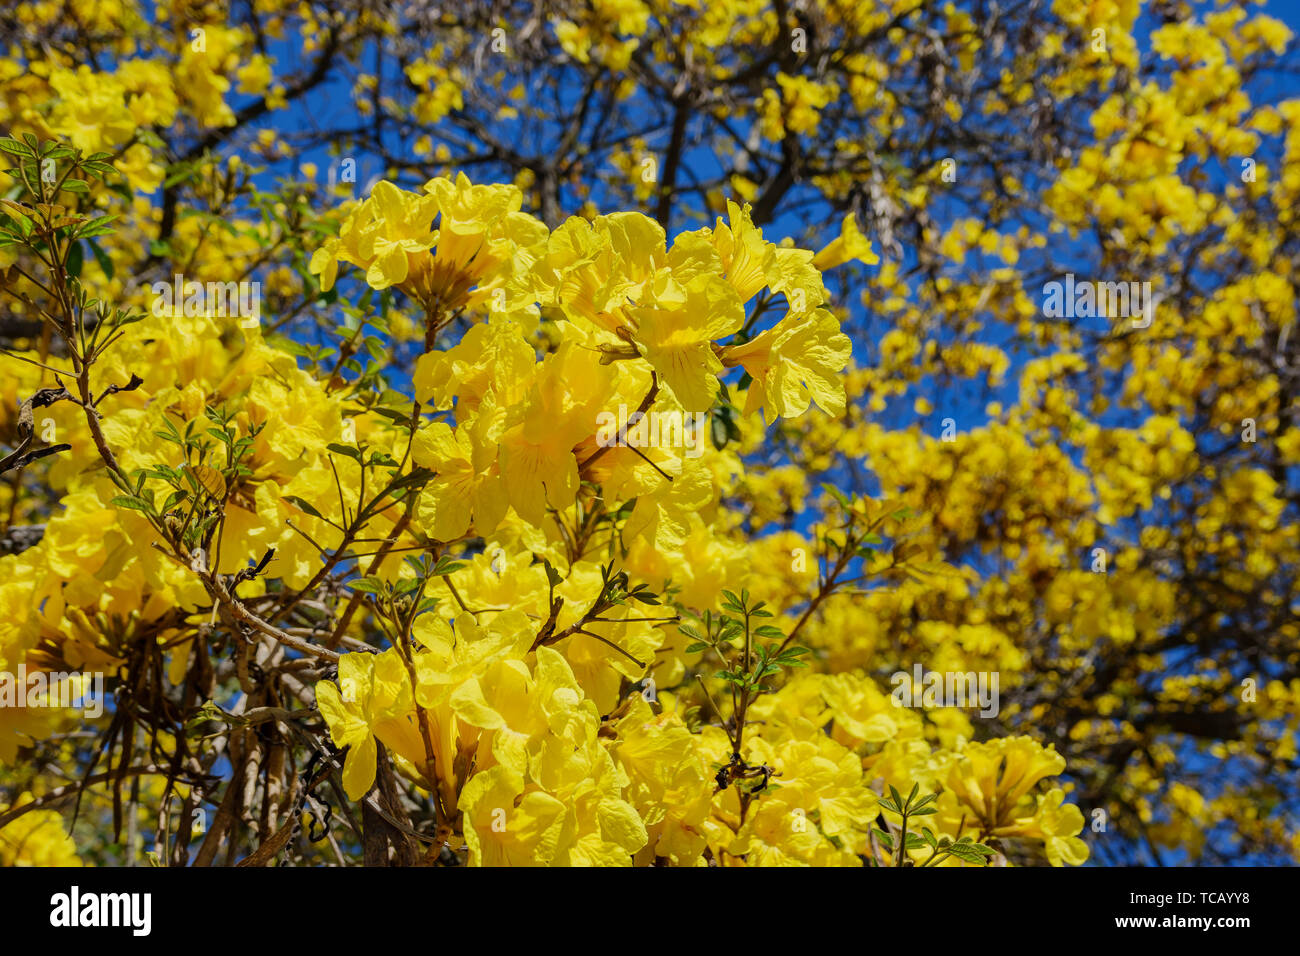 The beautiful yellow Handroanthus chrysotrichus blossom at Los Angeles, California Stock Photo